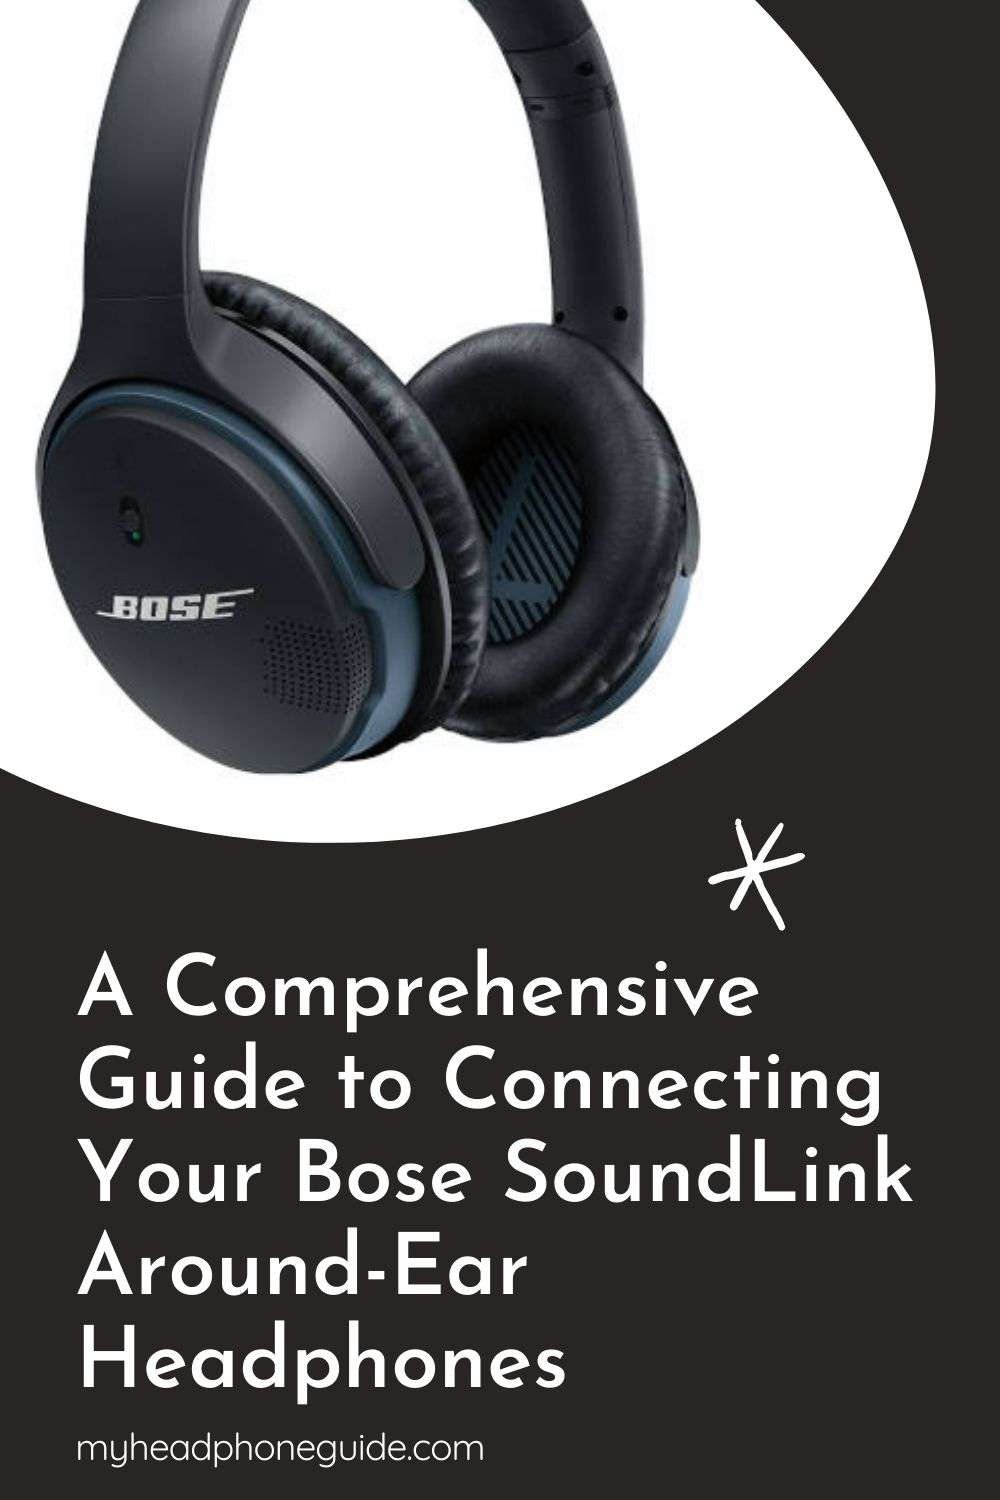 How to connect Bose SoundLink Around-Ear Headphones